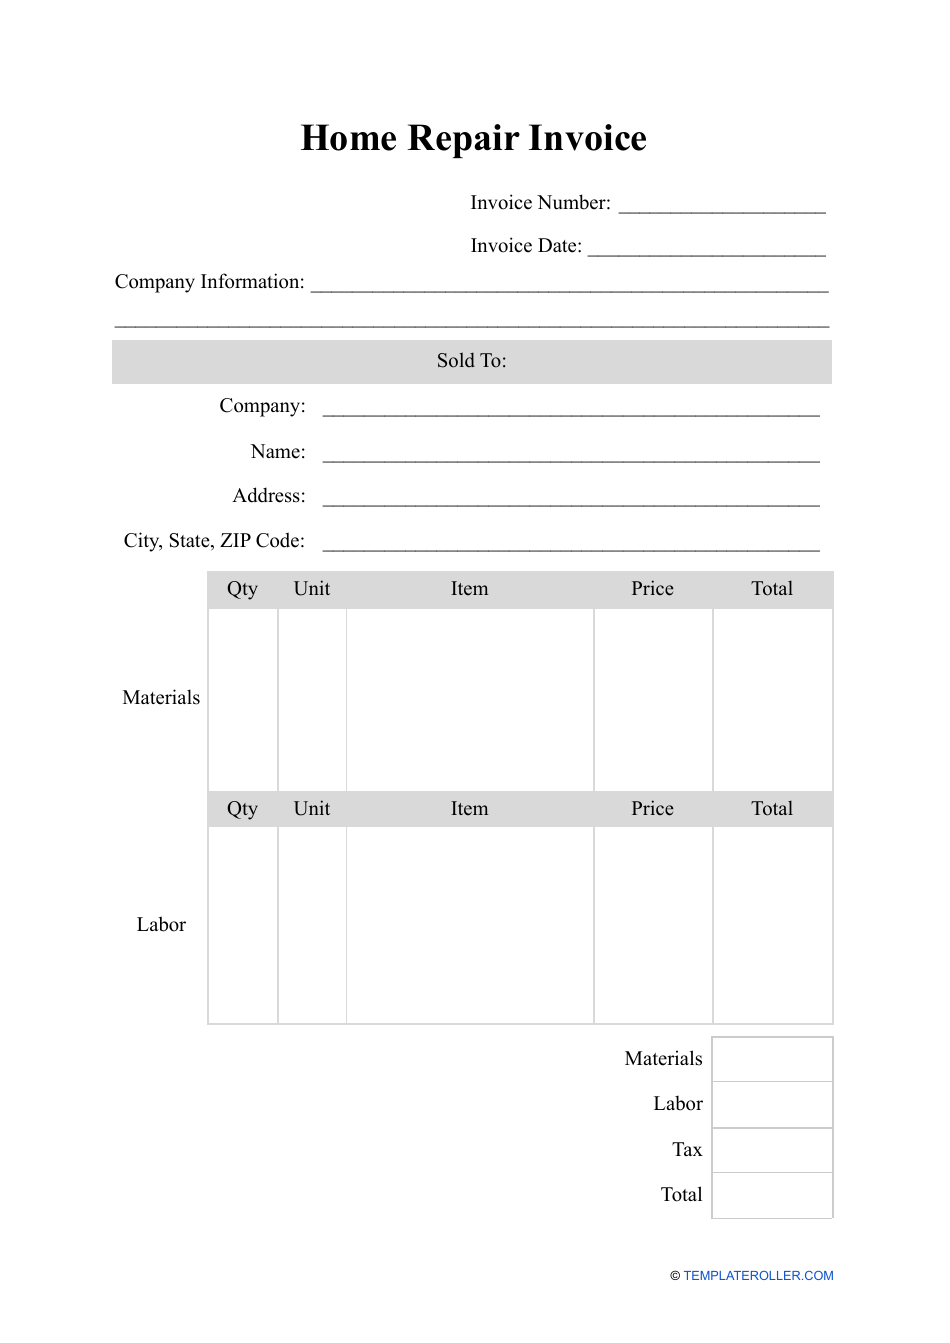 Home Repair Invoice Template, Page 1